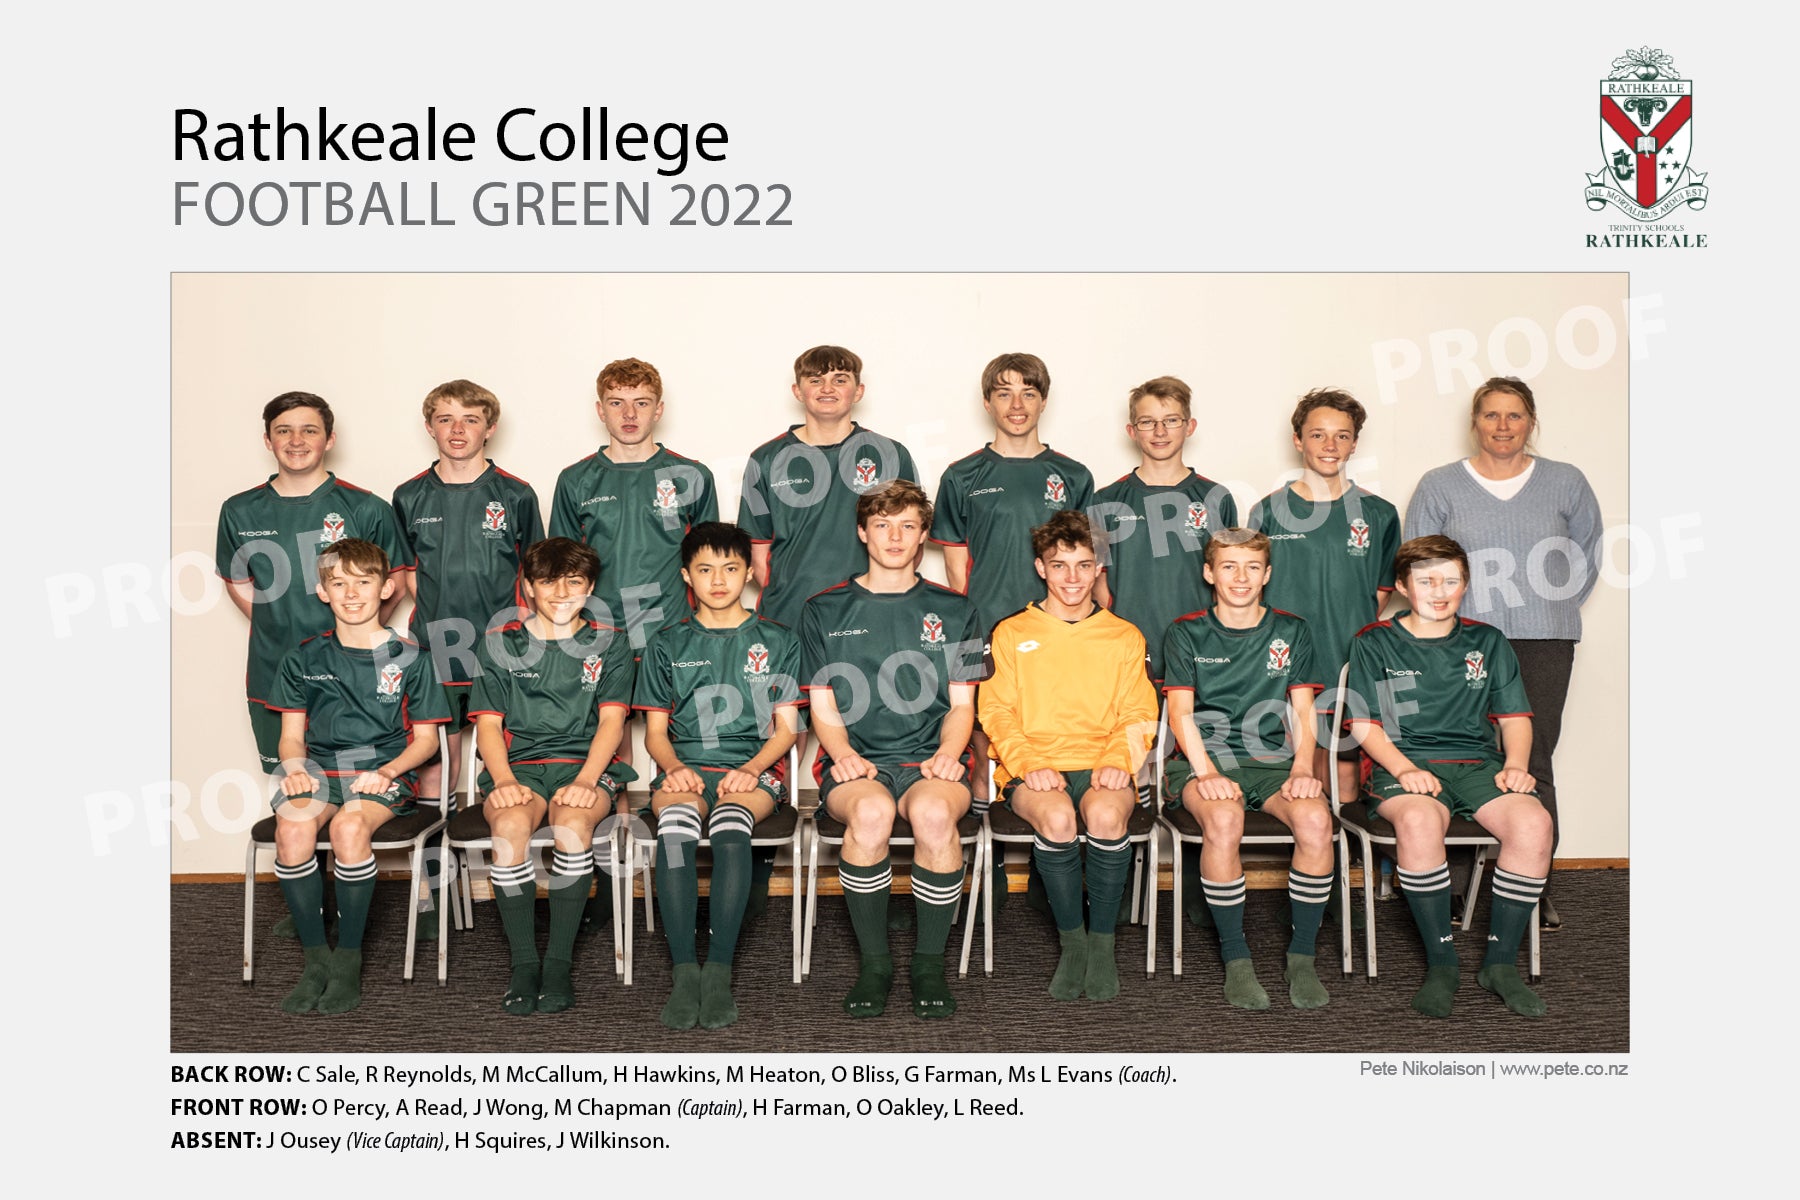 Football Green - Rathkeale College 2022